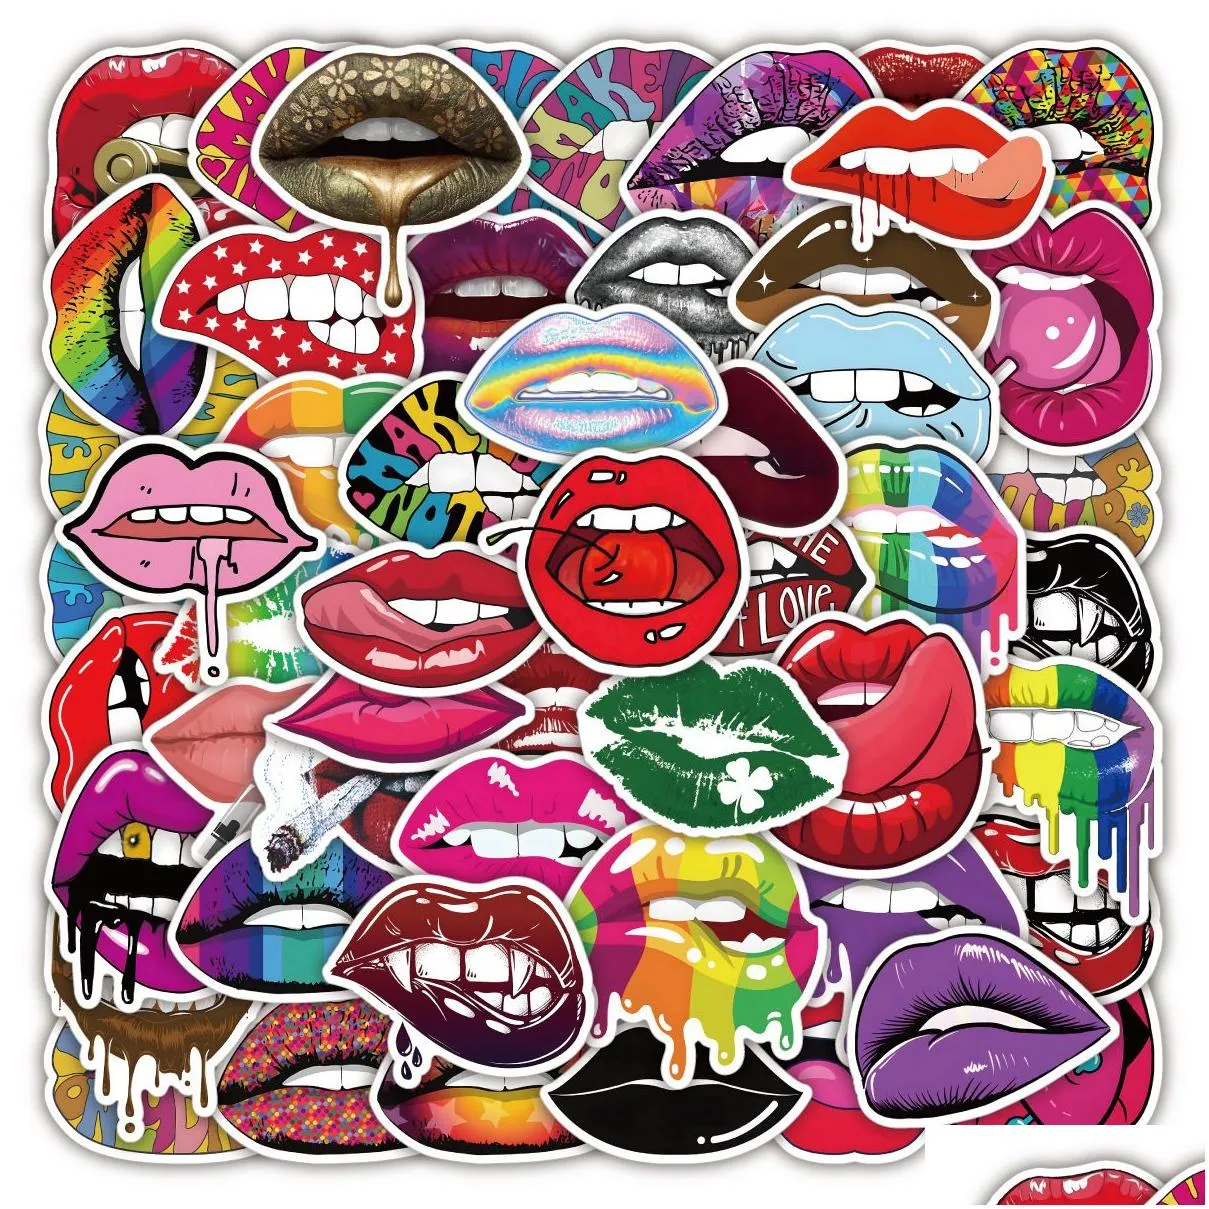 50PCS Skateboard Stickers Colorful Sexy Lips For Car Baby Scrapbooking Pencil Case Diary Phone Laptop Planner Decoration Book Album Kids Toys DIY